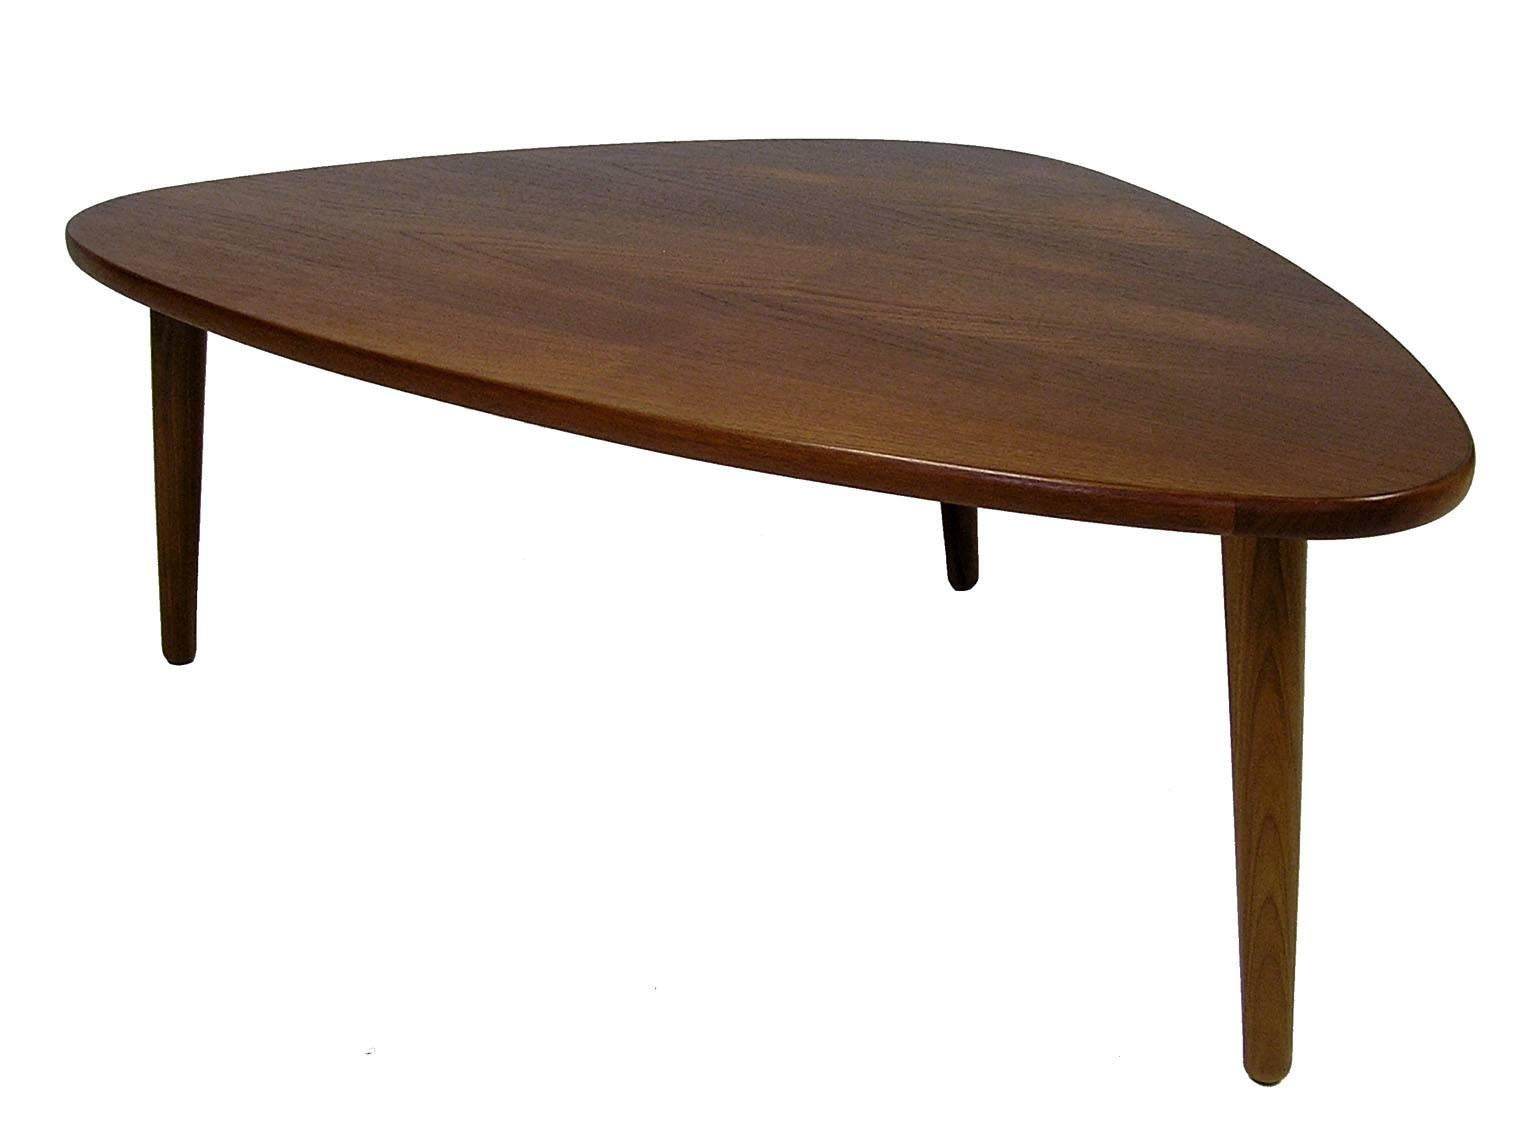 A stylish teak coffee table from the 1960s by Anton Kildeberg Møbelfabrik of Denmark. Features a unique organic form with tapered conical legs and tons of Mid-Century Modern era character. Overall excellent condition with makers marks on the